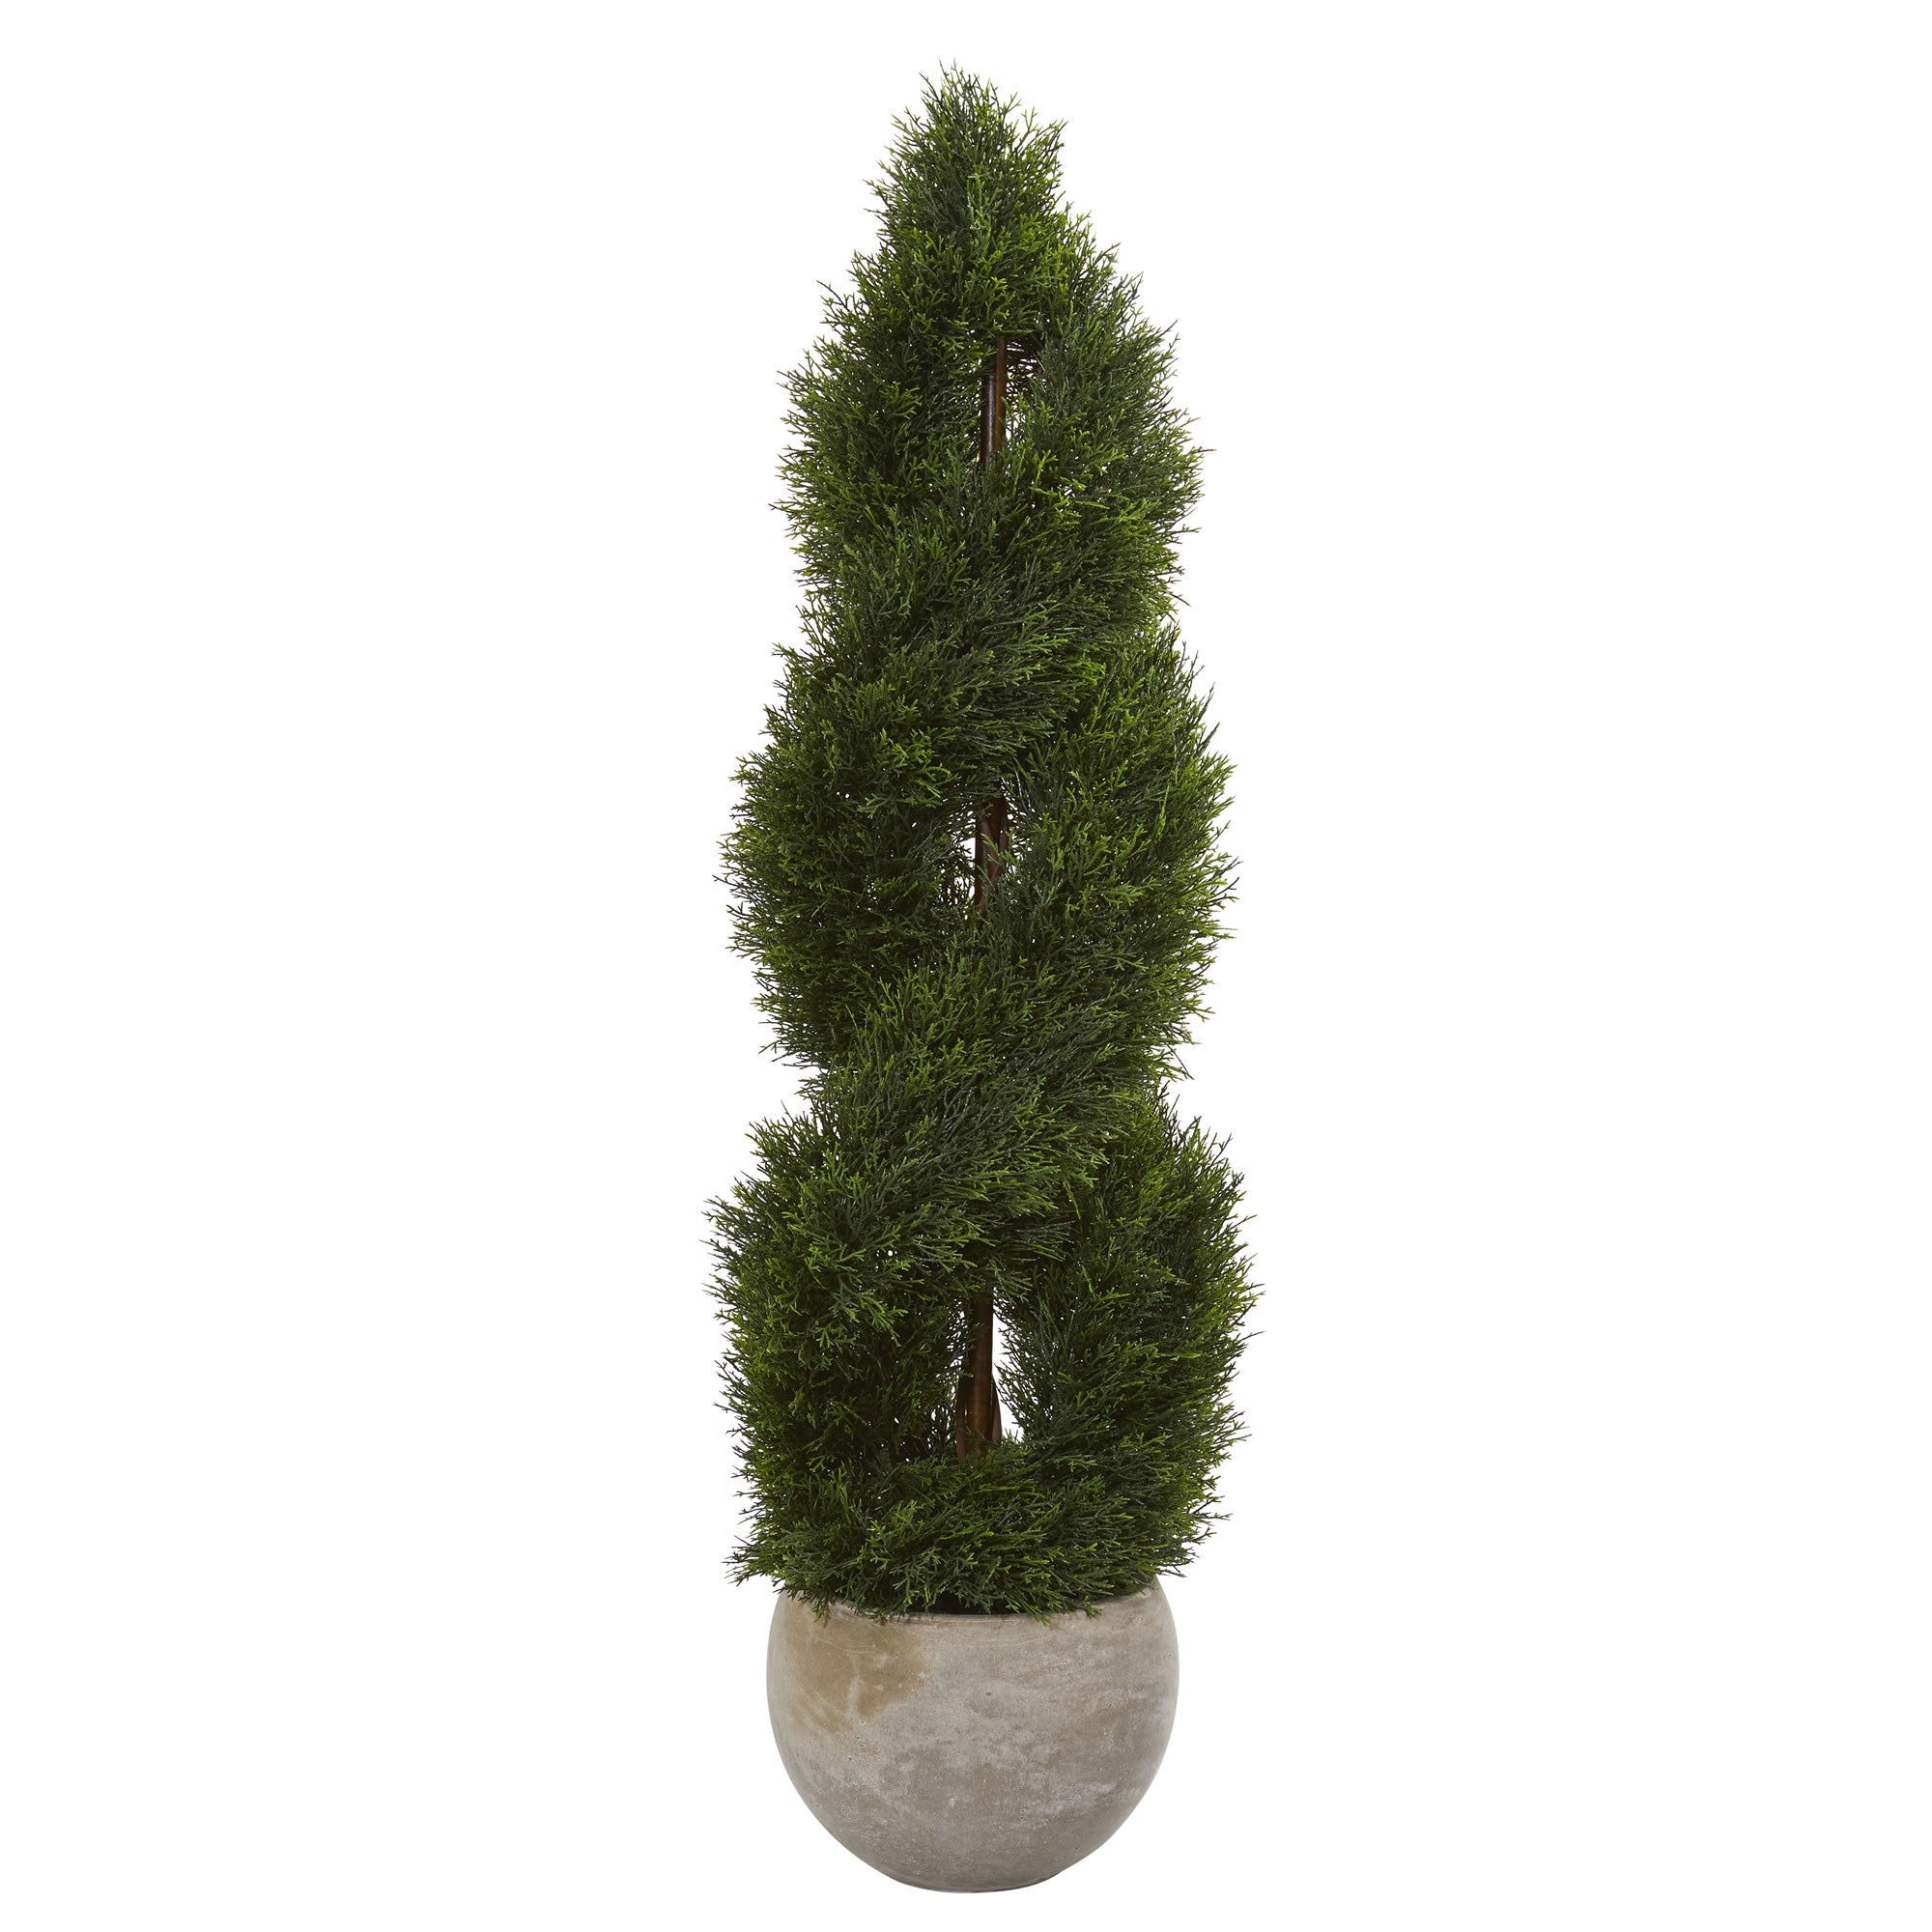 4" Double Pond Cypress Spiral Artificial Tree in Sand Colored Planter UV Resistant (Indoor/Outdoor)